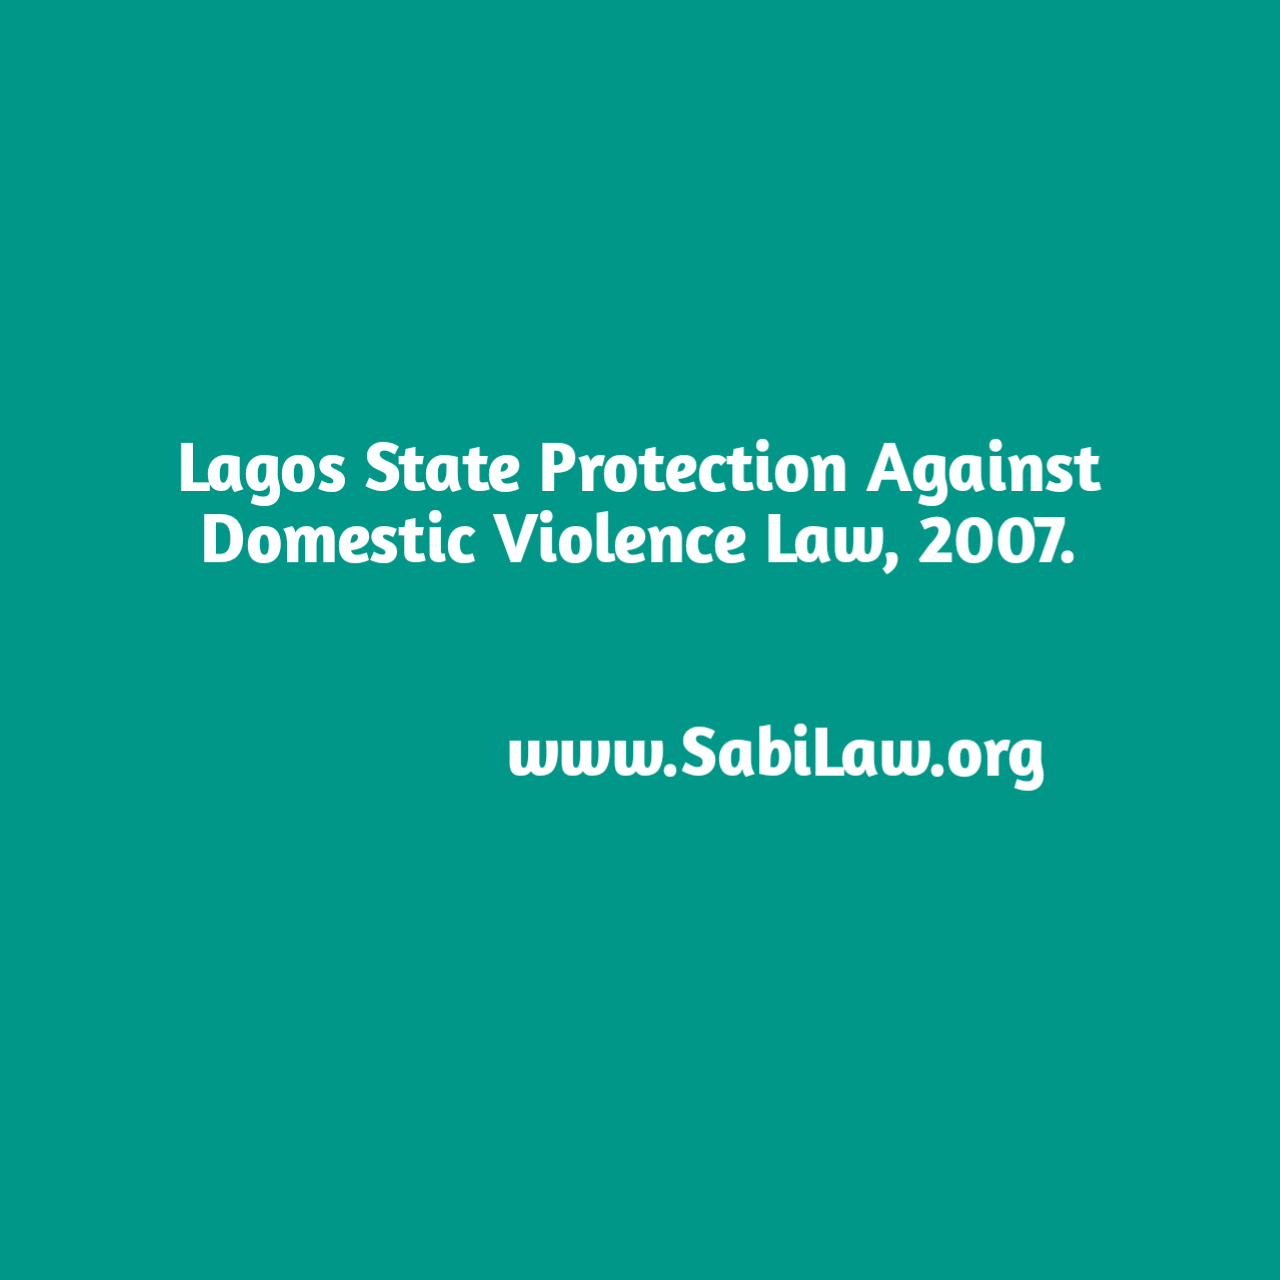 Lagos State Protection Against Domestic Violence Law, 2007